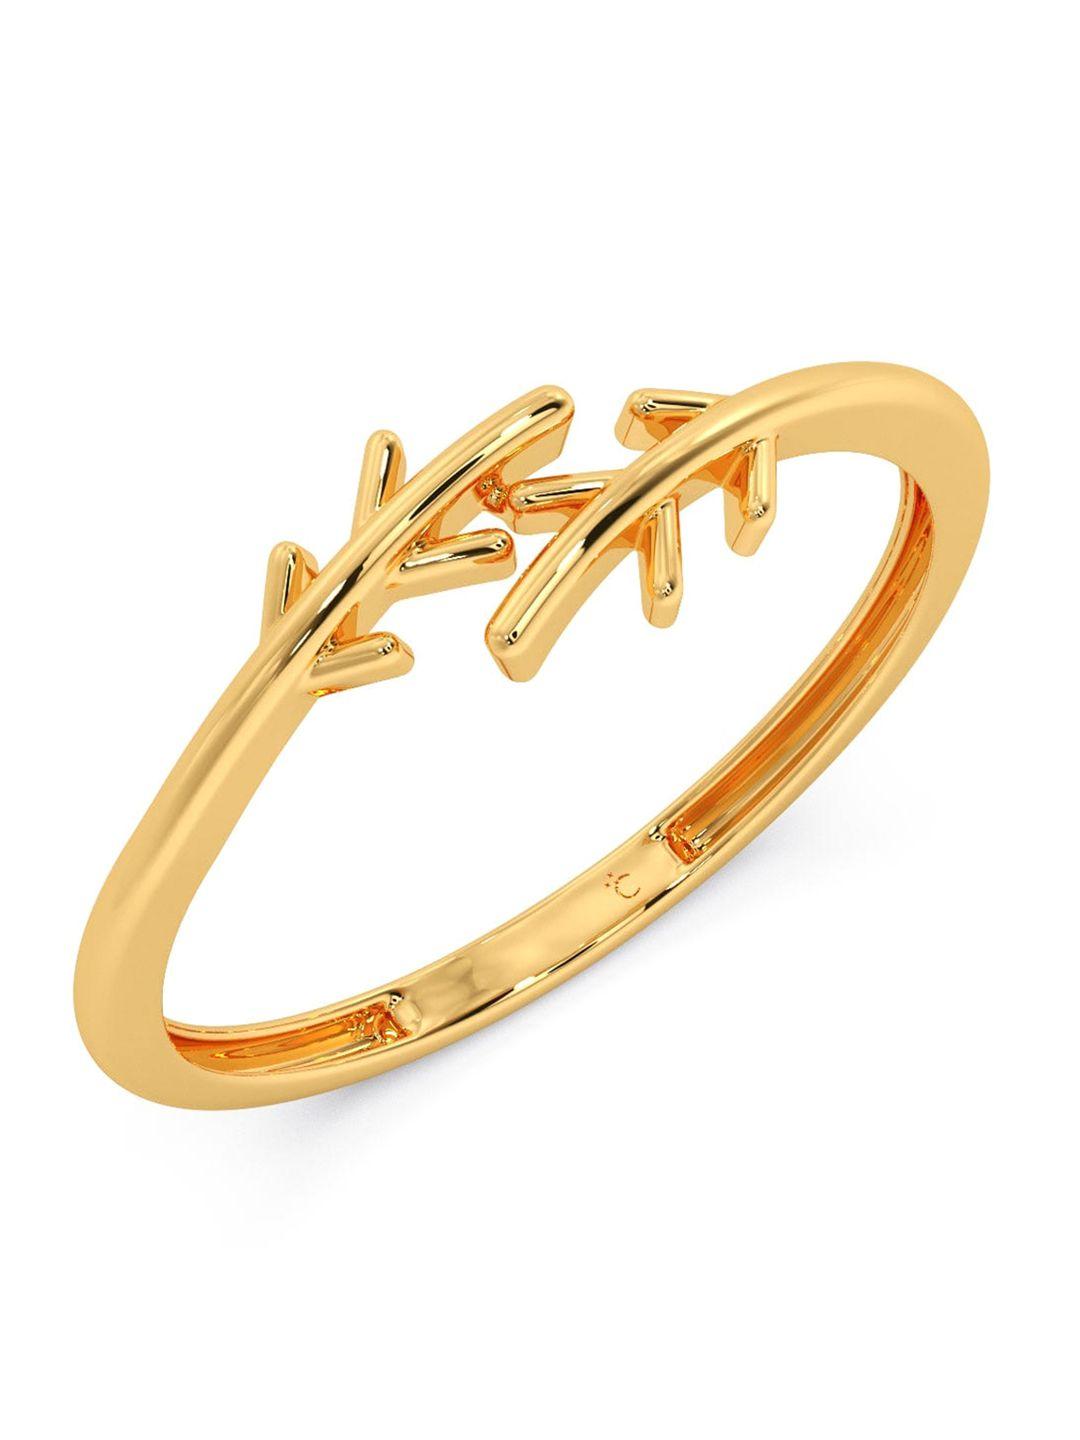 candere-a-kalyan-jewellers-company-18kt-gold-ring-0.71gm